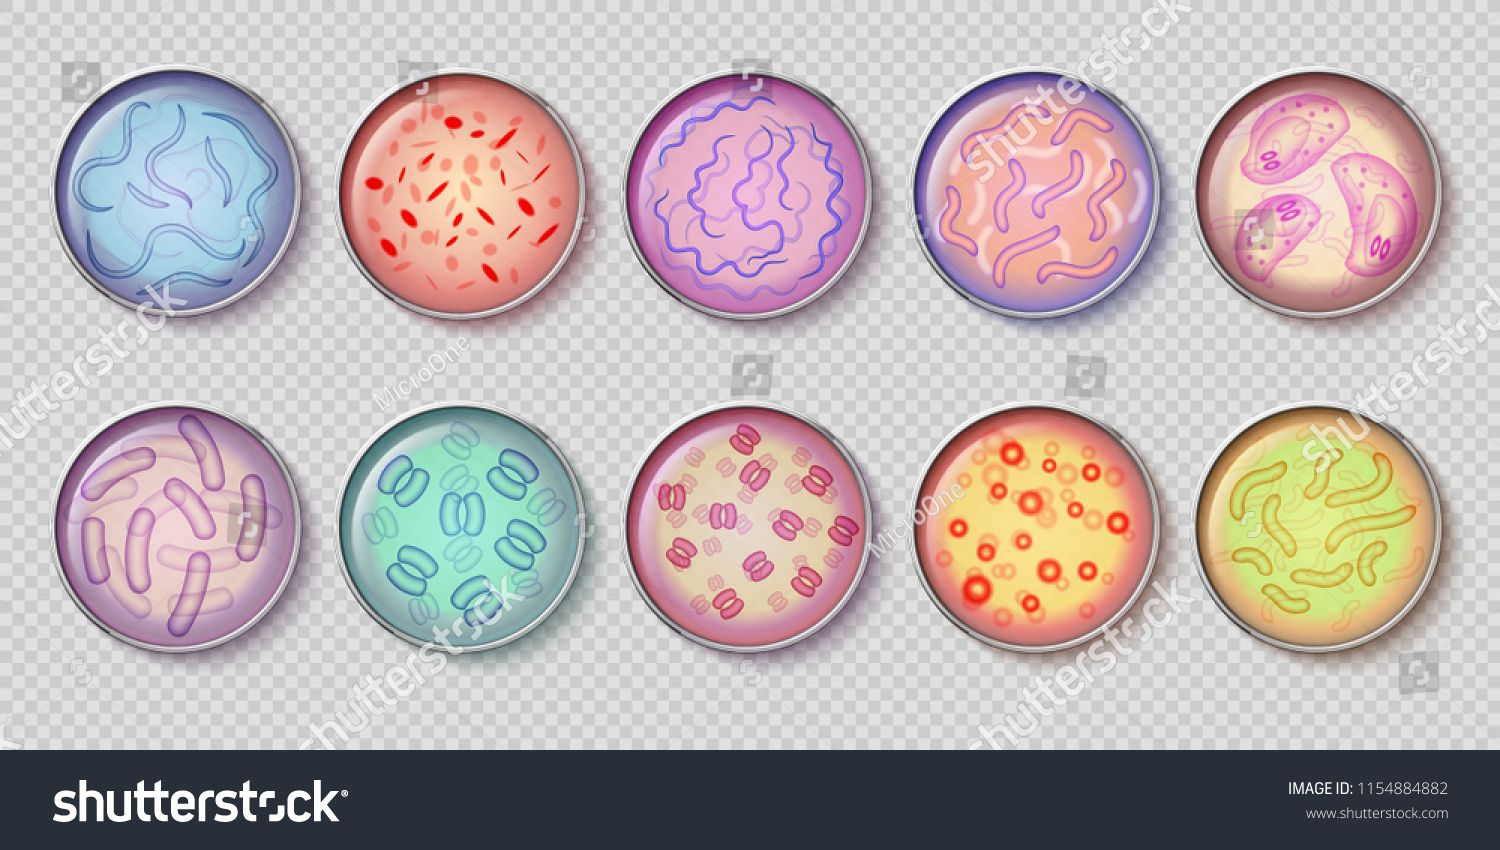 Bacteria clipart bacterial culture. Bacteriology gram negative and